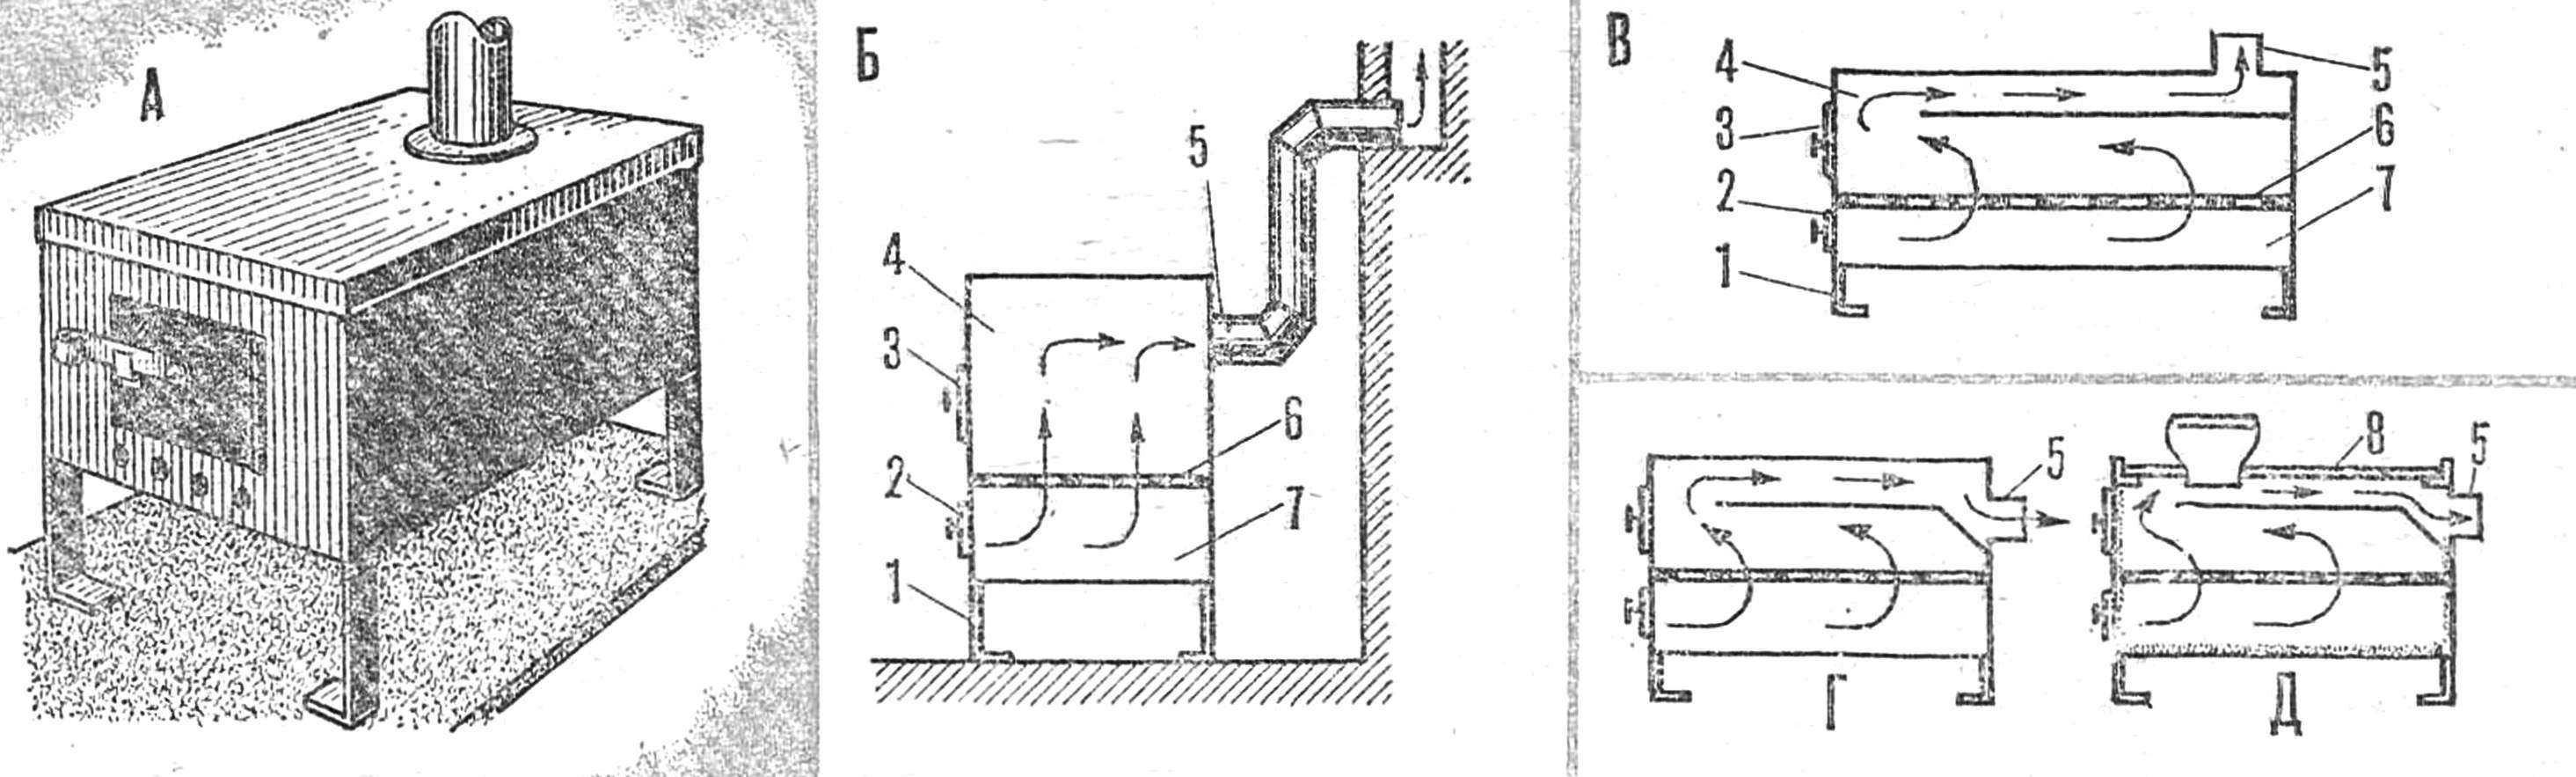 Fig. 1. Furnace from a roofing steel